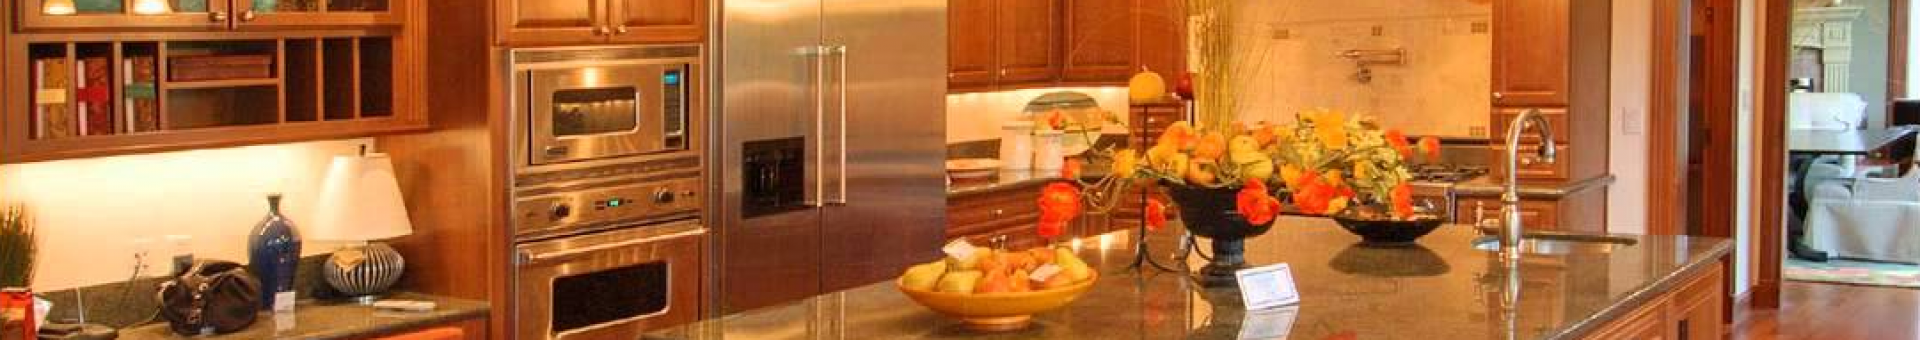 Kitchen and Bathroom Cabinet Doors and Fronts San Diego